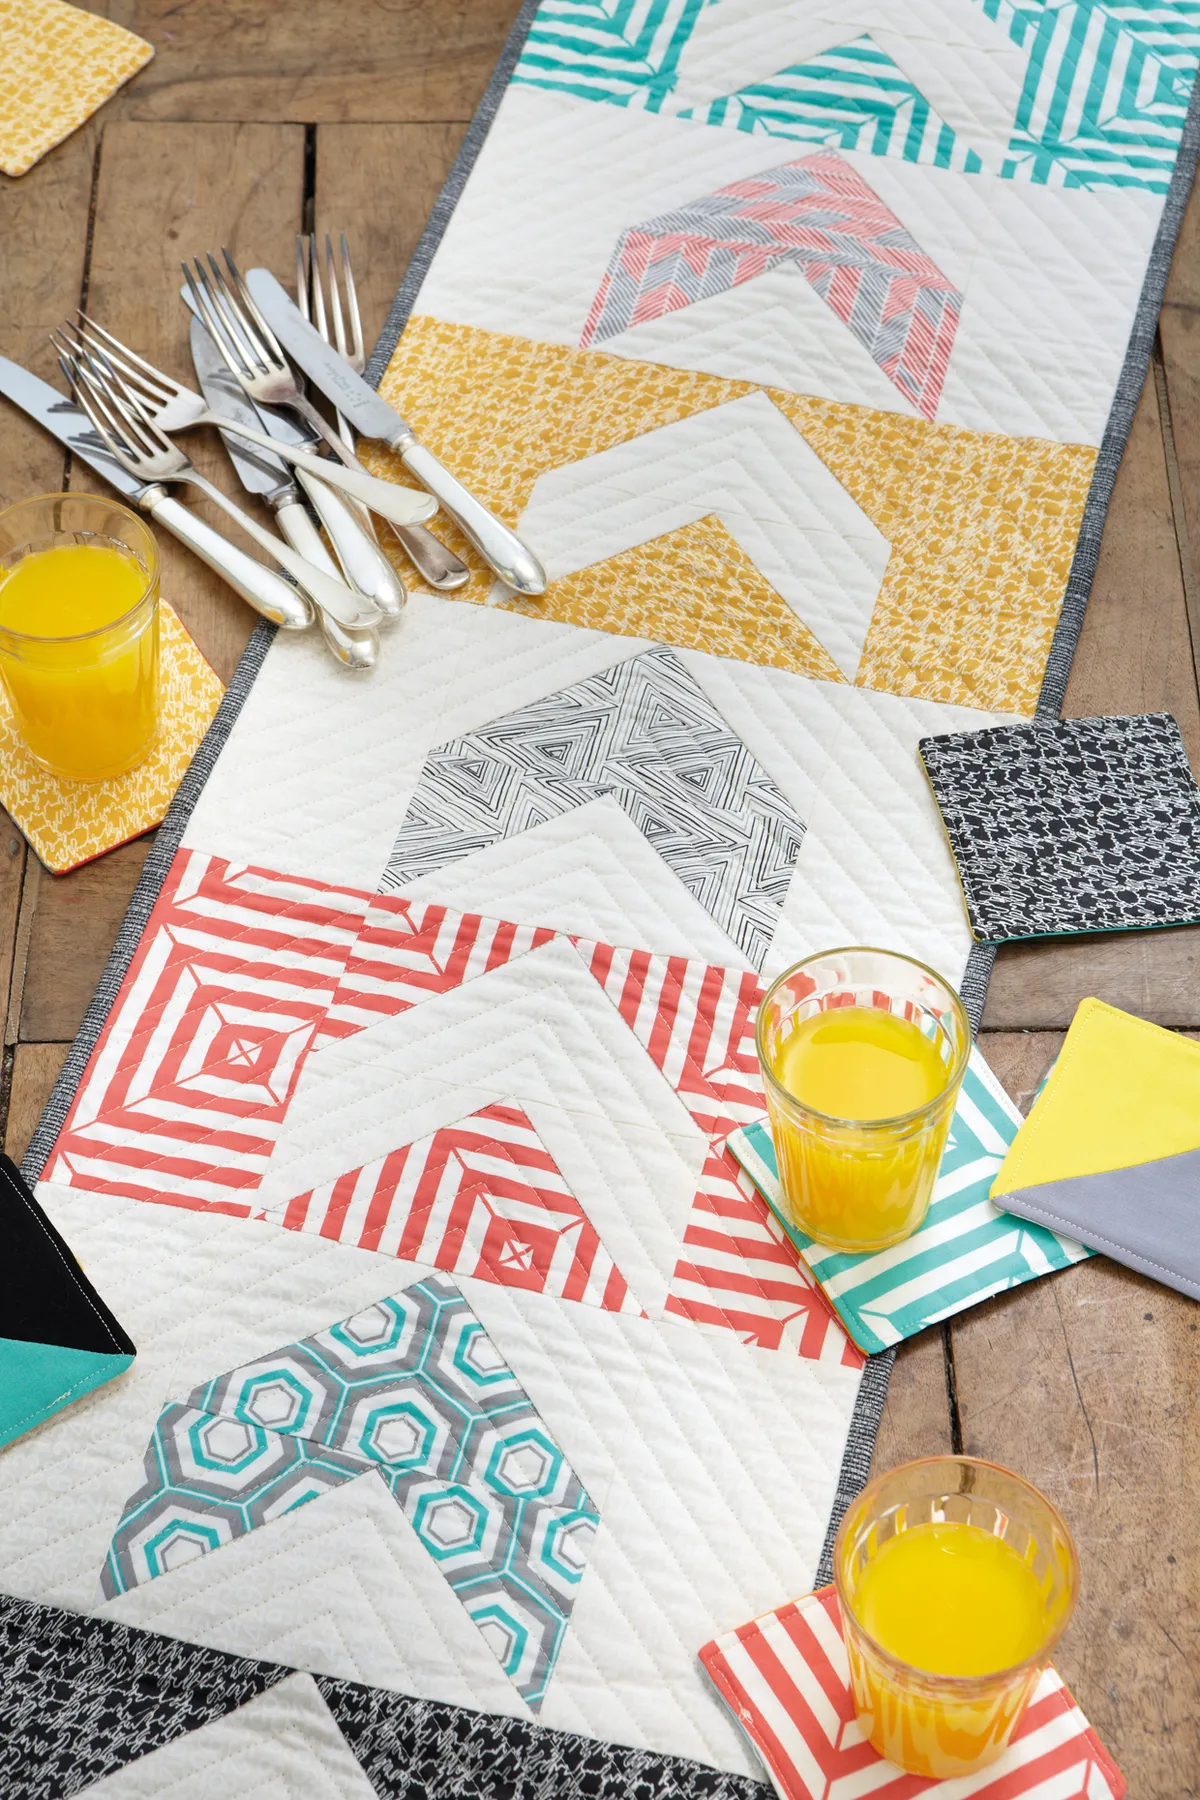 Treat your table to a pretty quilt runner! - Gathered